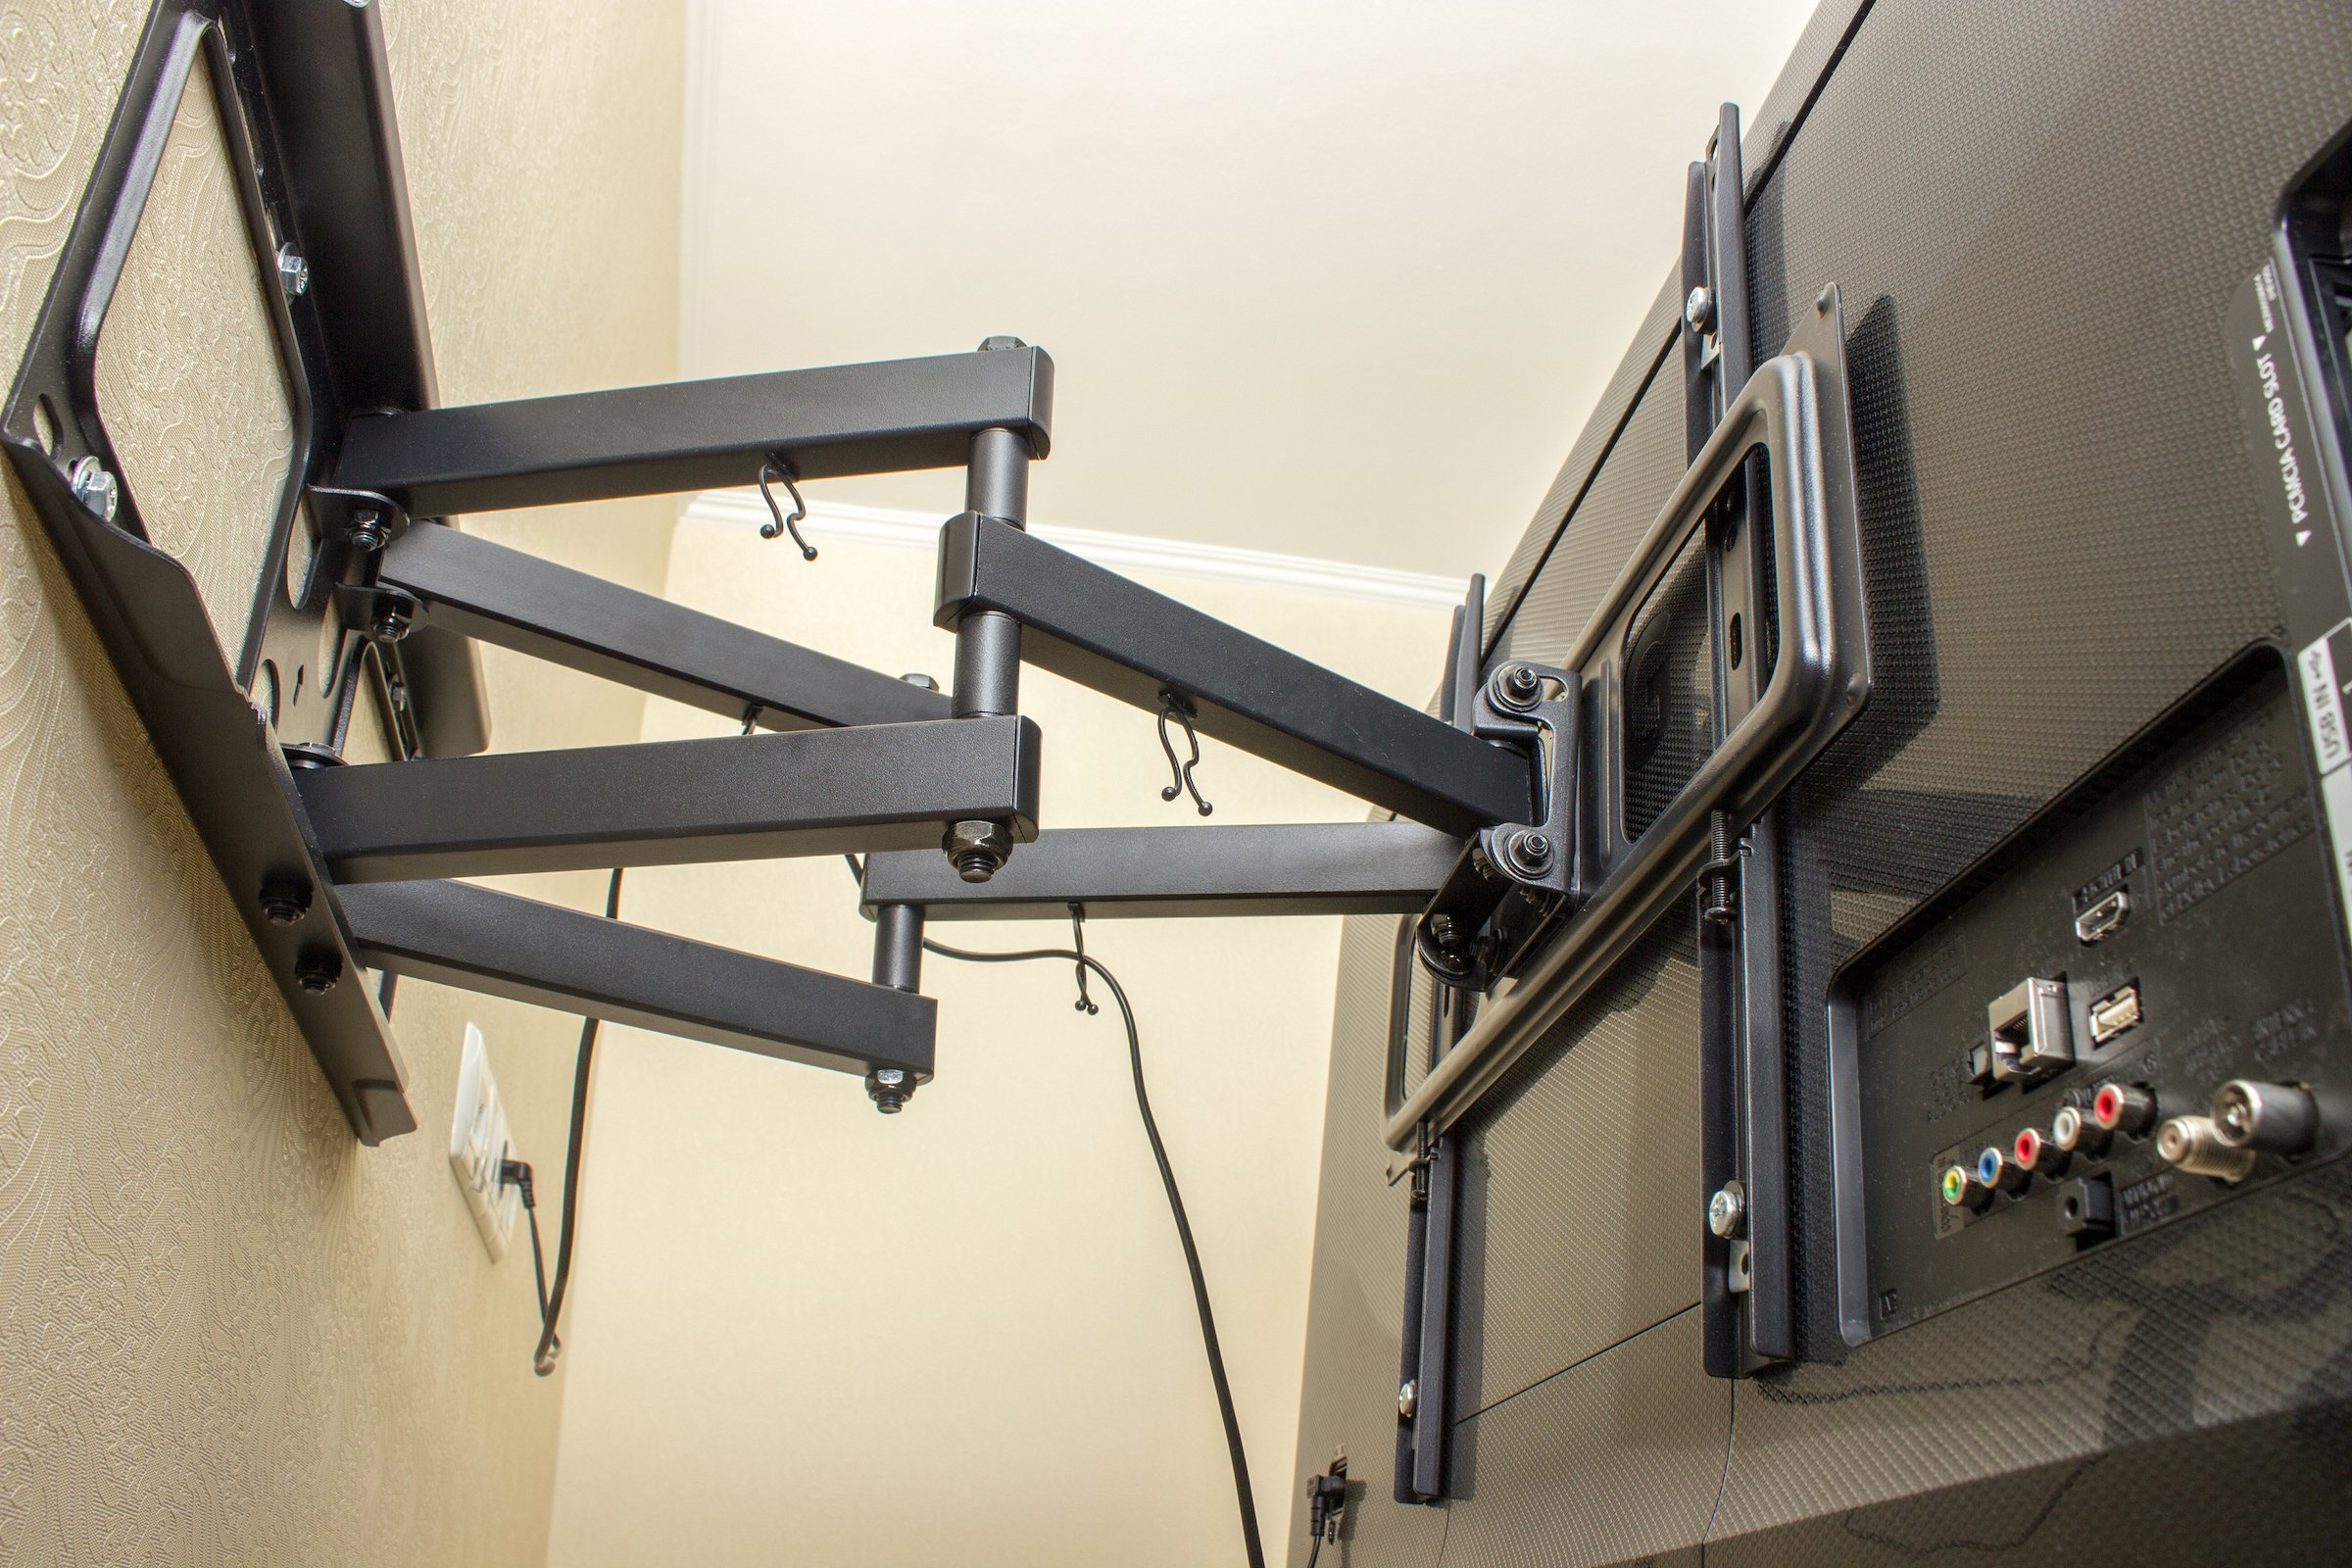 One of the types of the best TV mounting brackets we'll share is a full-motion TV mount.